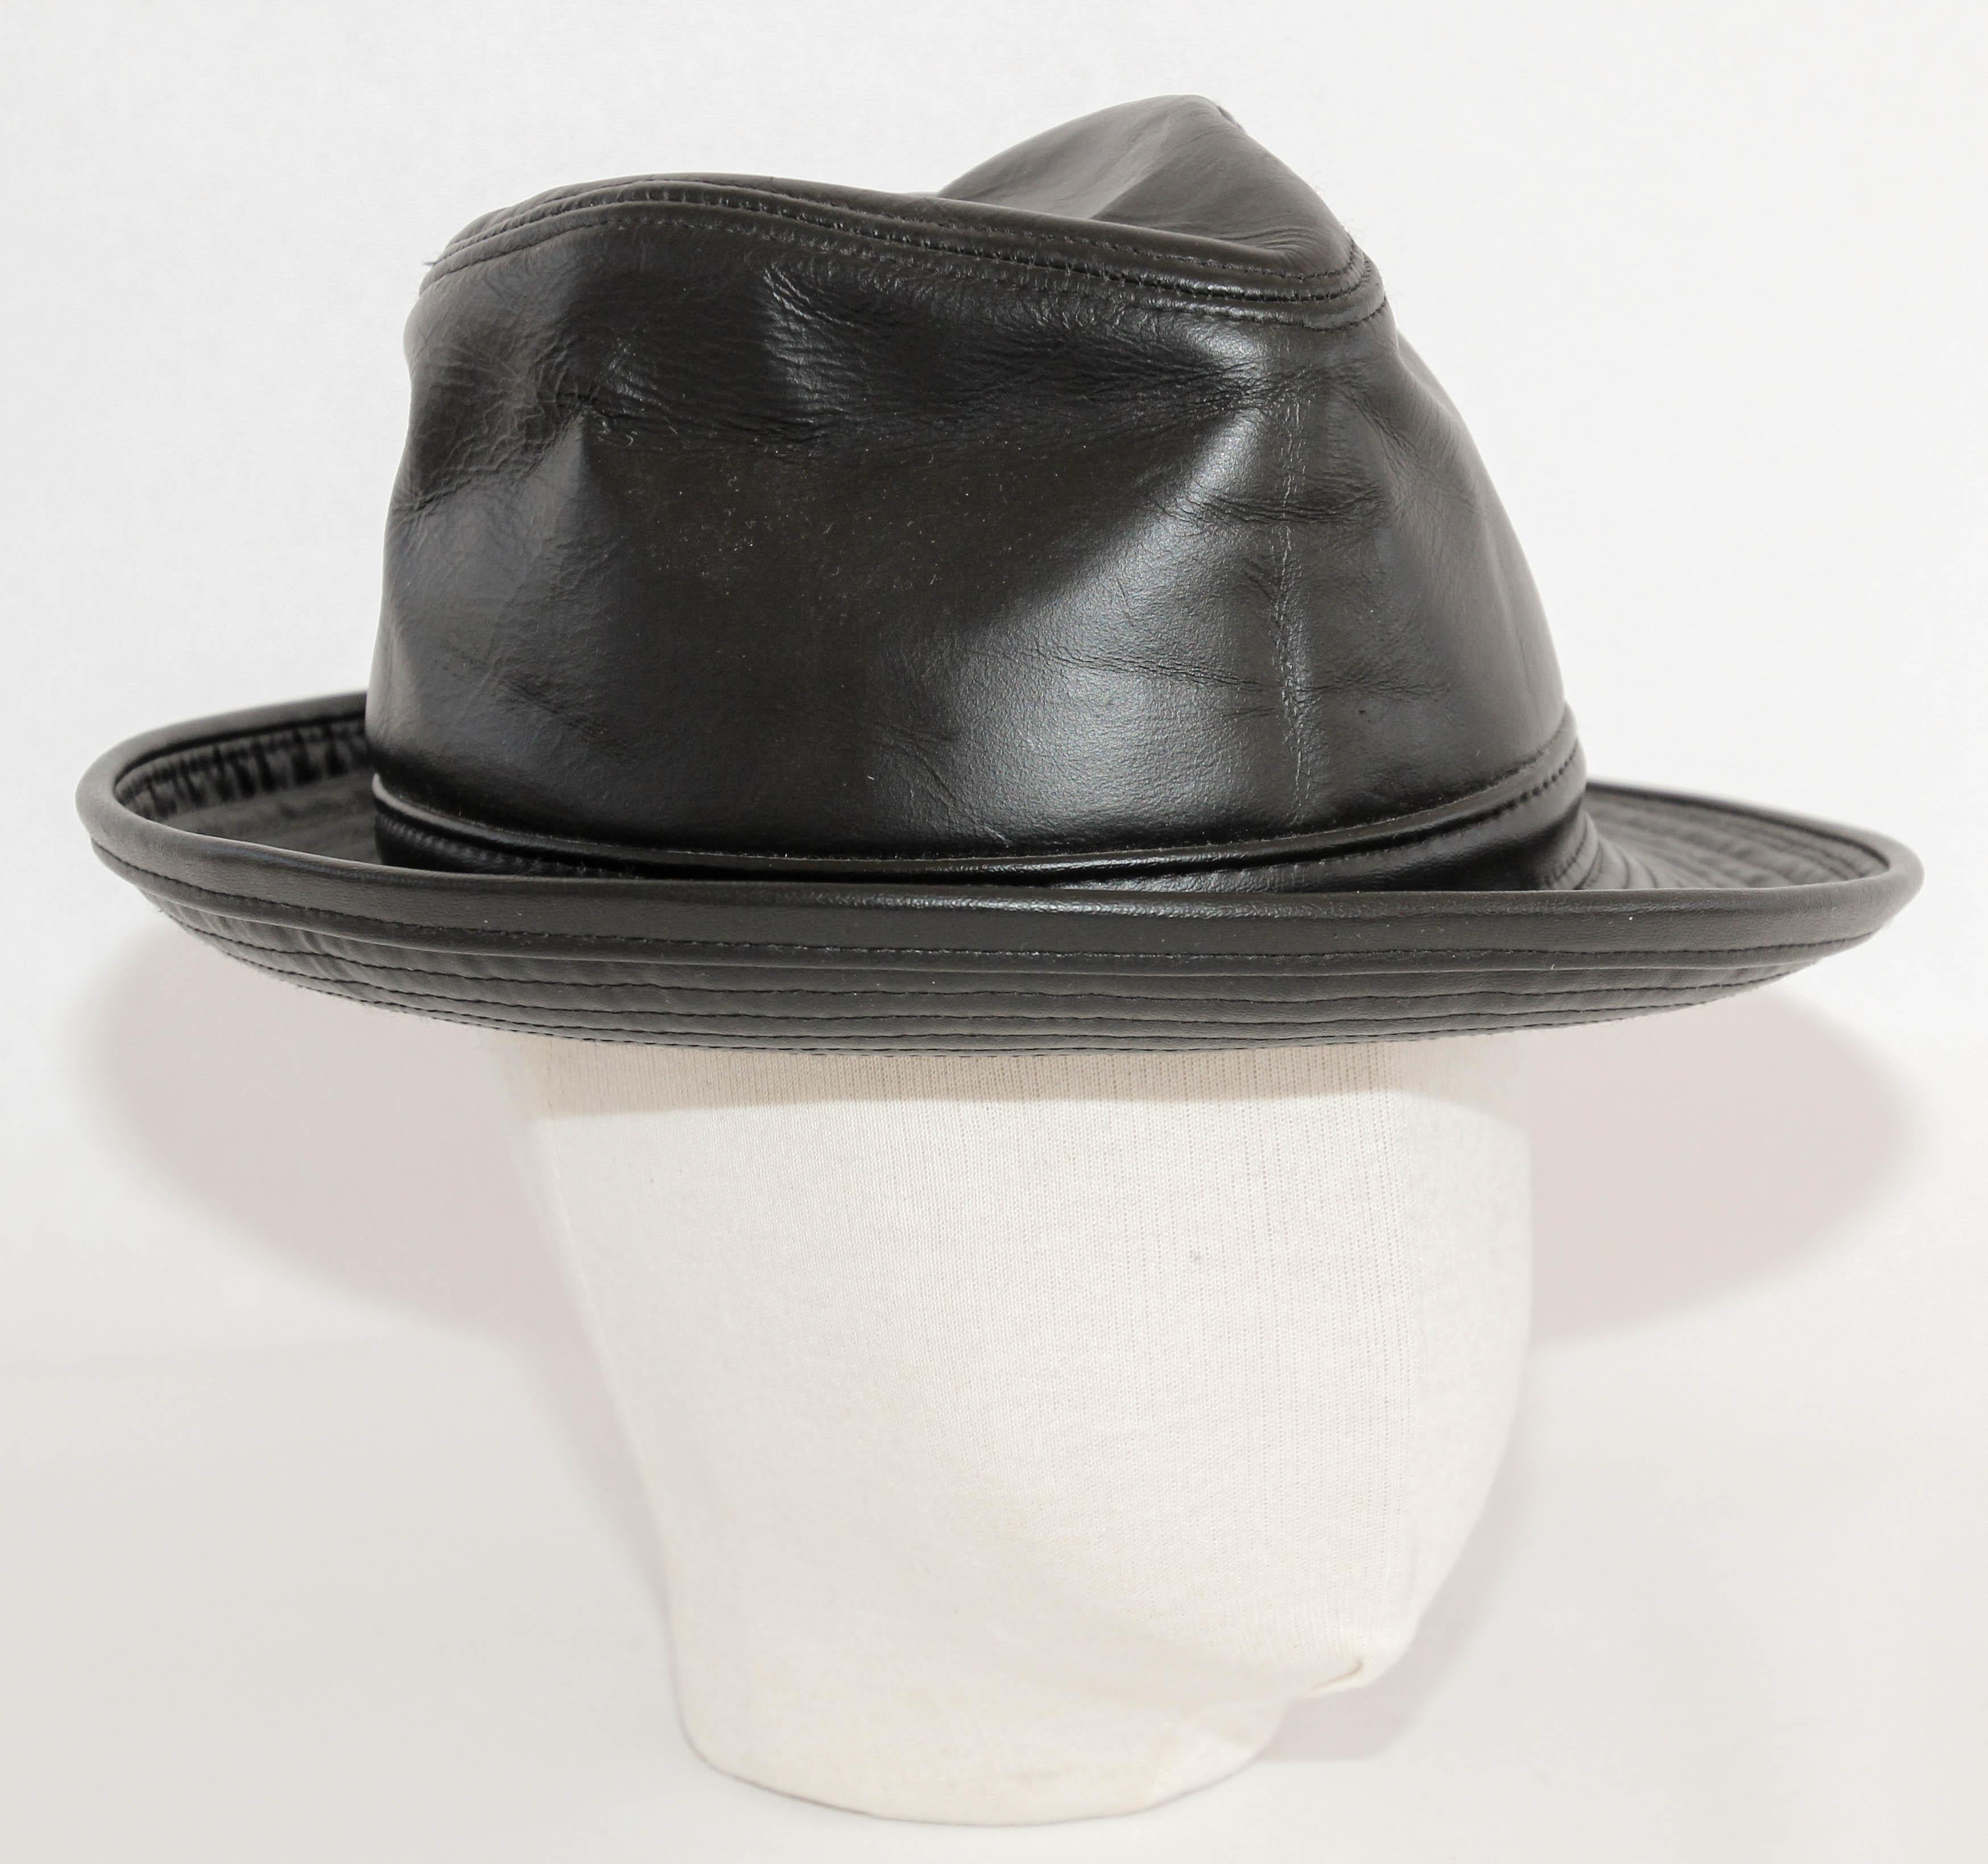 1980's New York Winner Lambskin Leather Fedora Hat.
Made in the USA.
The New York Winner Hat Company's Lambskin Leather Fedora Hat is a sleek and stylish trilby sending us back to the days of Frank Sinatra and 1940s' private eye films. The 100%